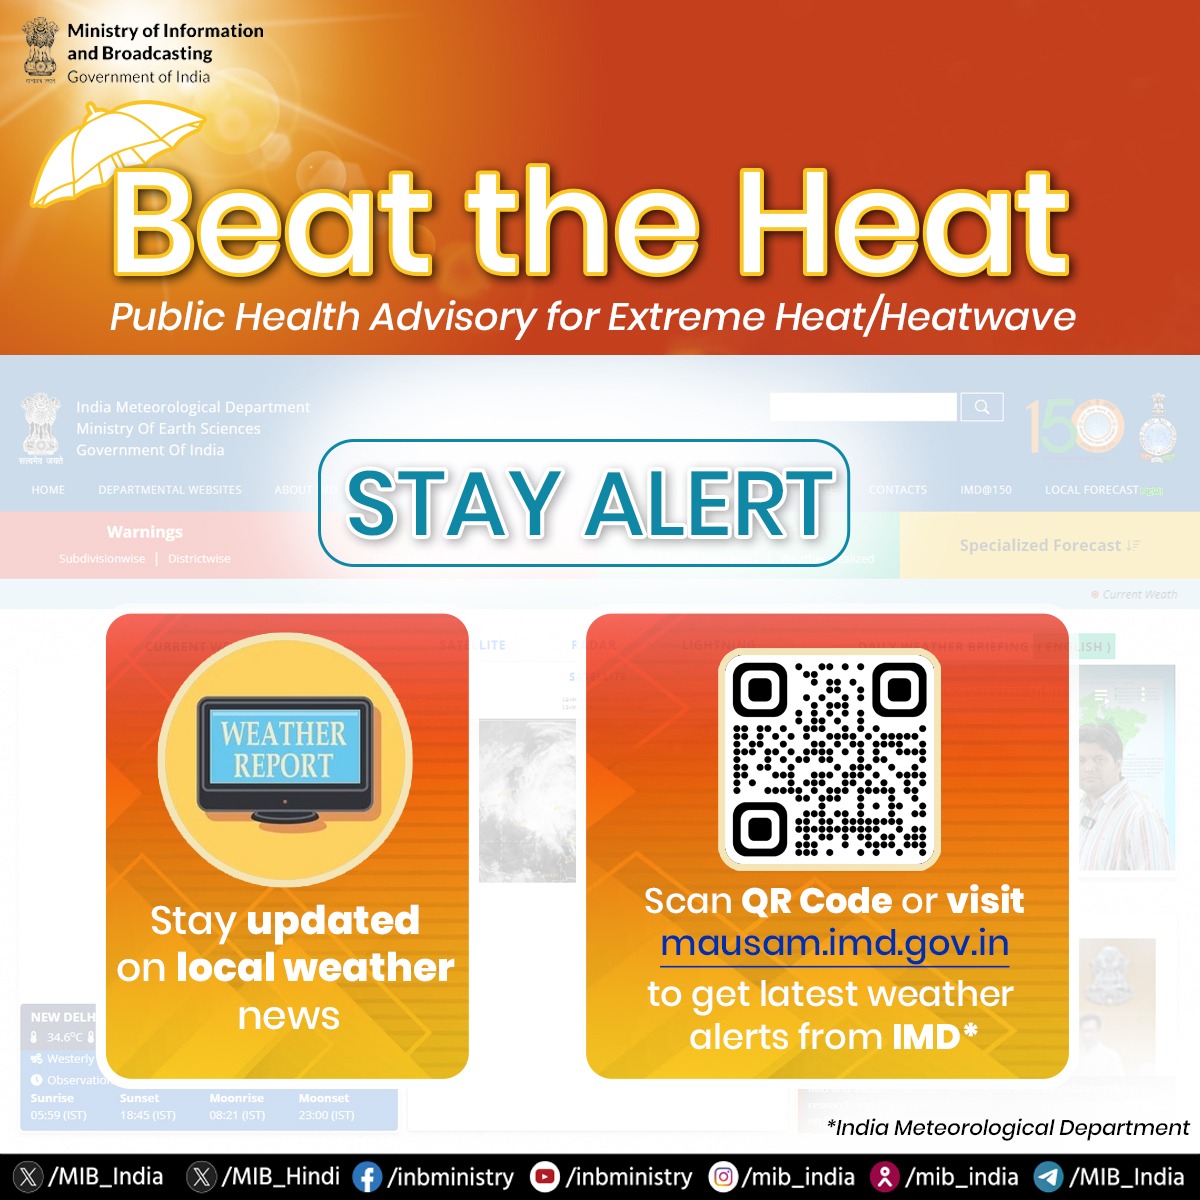 #HeatWave: Beat the Heat! 📝Public Health Advisory for Extreme Heat/Heatwave☀️ ➡️Stay Alert: 💠Stay updated on local weather news📻📺 💠Scan QR Code or visit mausam.imd.gov.in to get latest weather alerts from IMD📲 Stay safe and be aware! #WeatherReady #BeatTheHeat